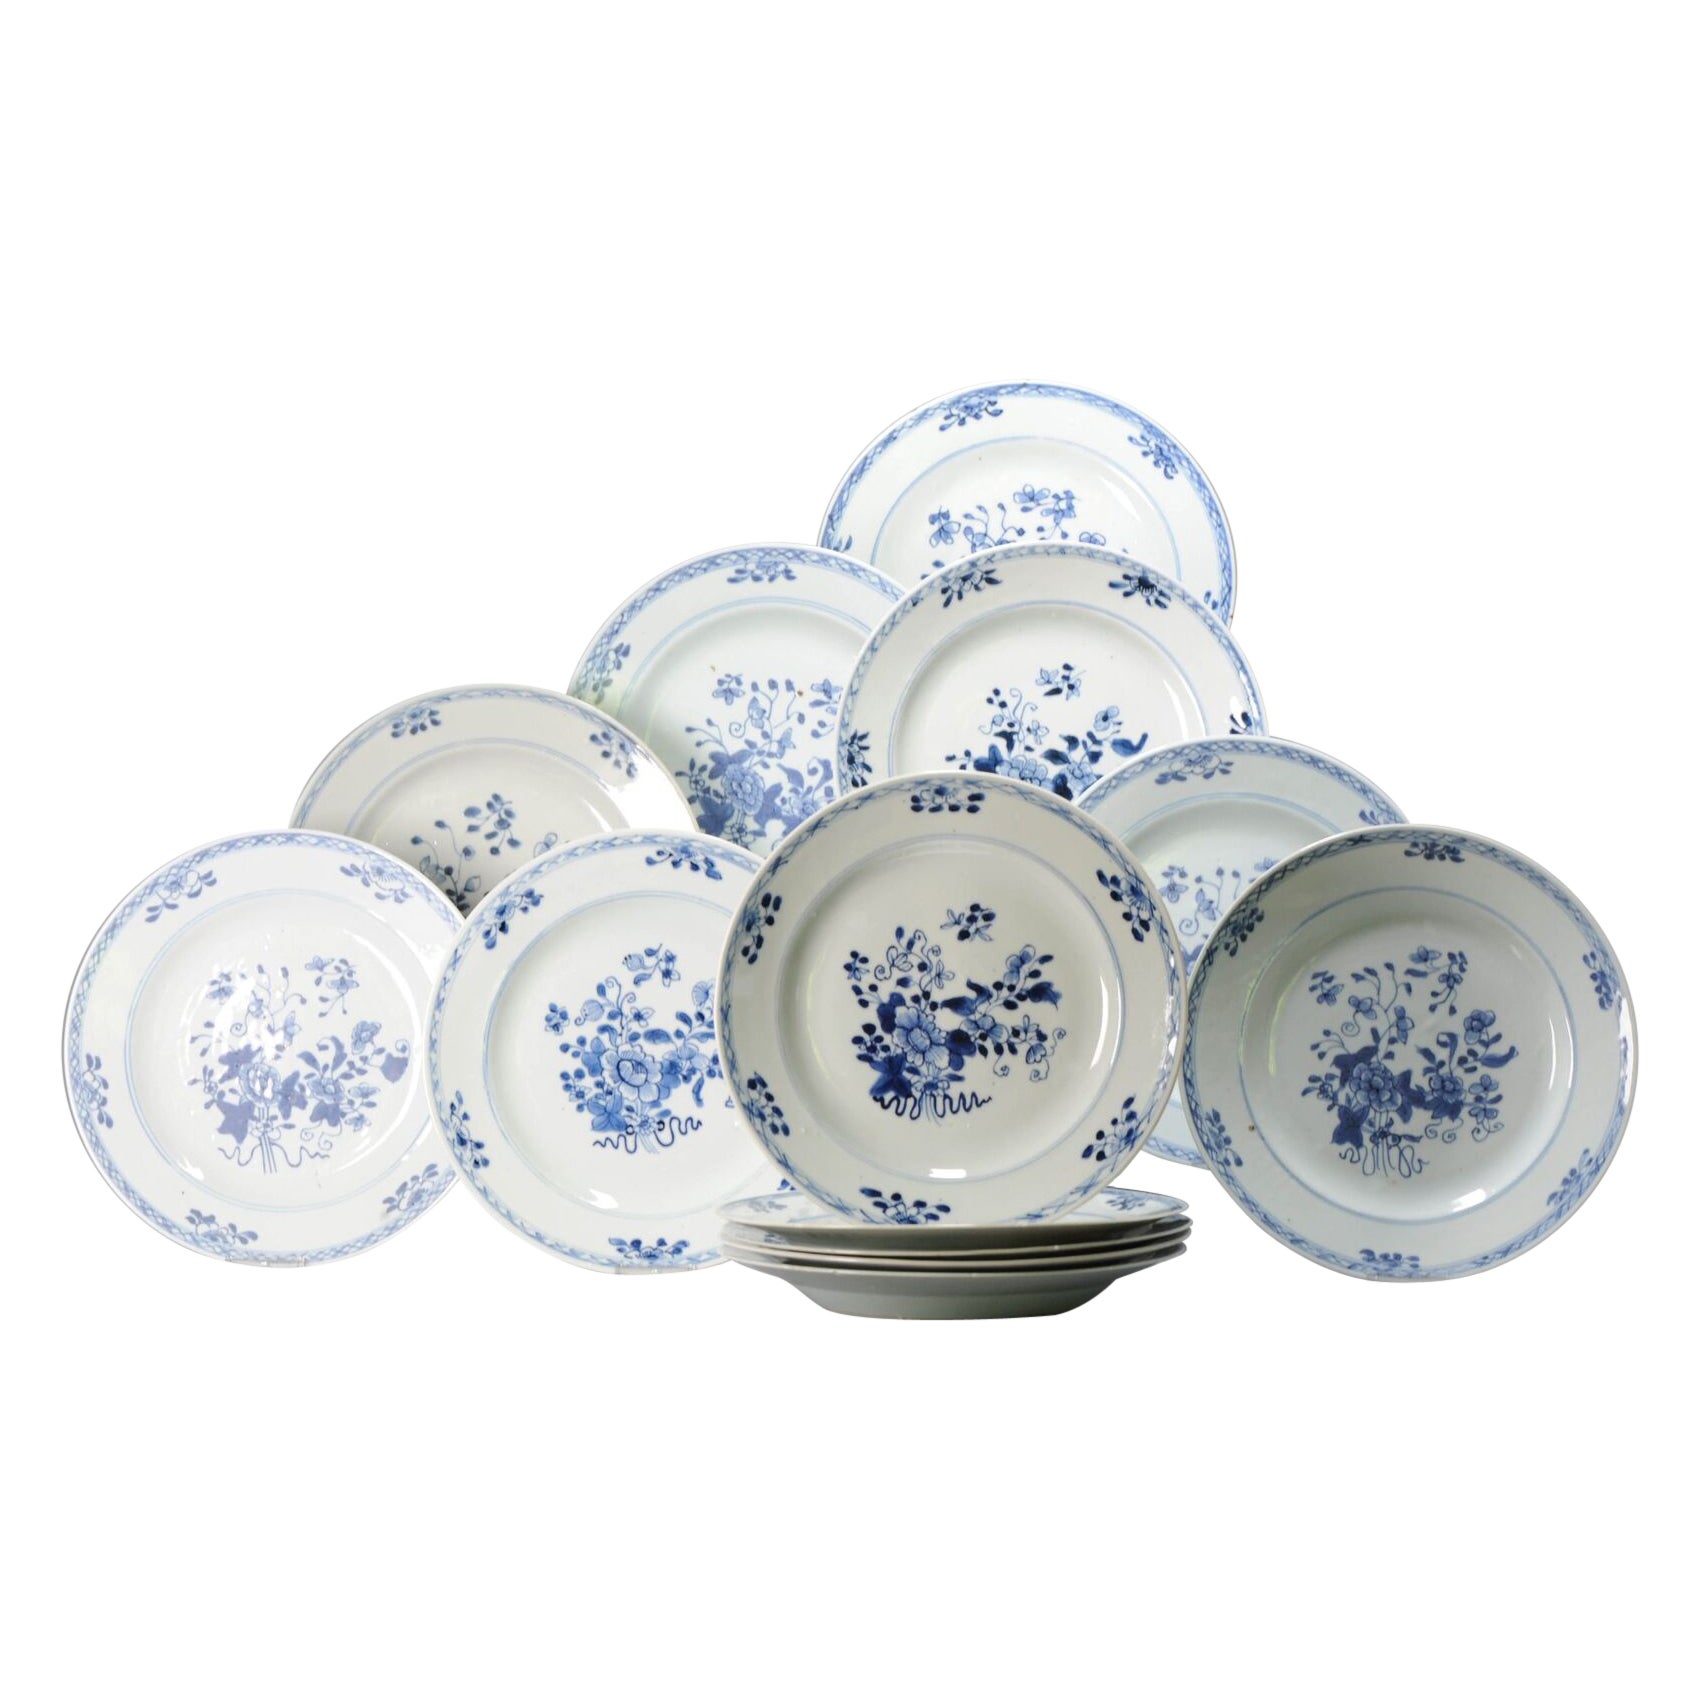 Set of 13 Antique Chinese Porcelain Qing Period Blue White Set Dinner Plates For Sale